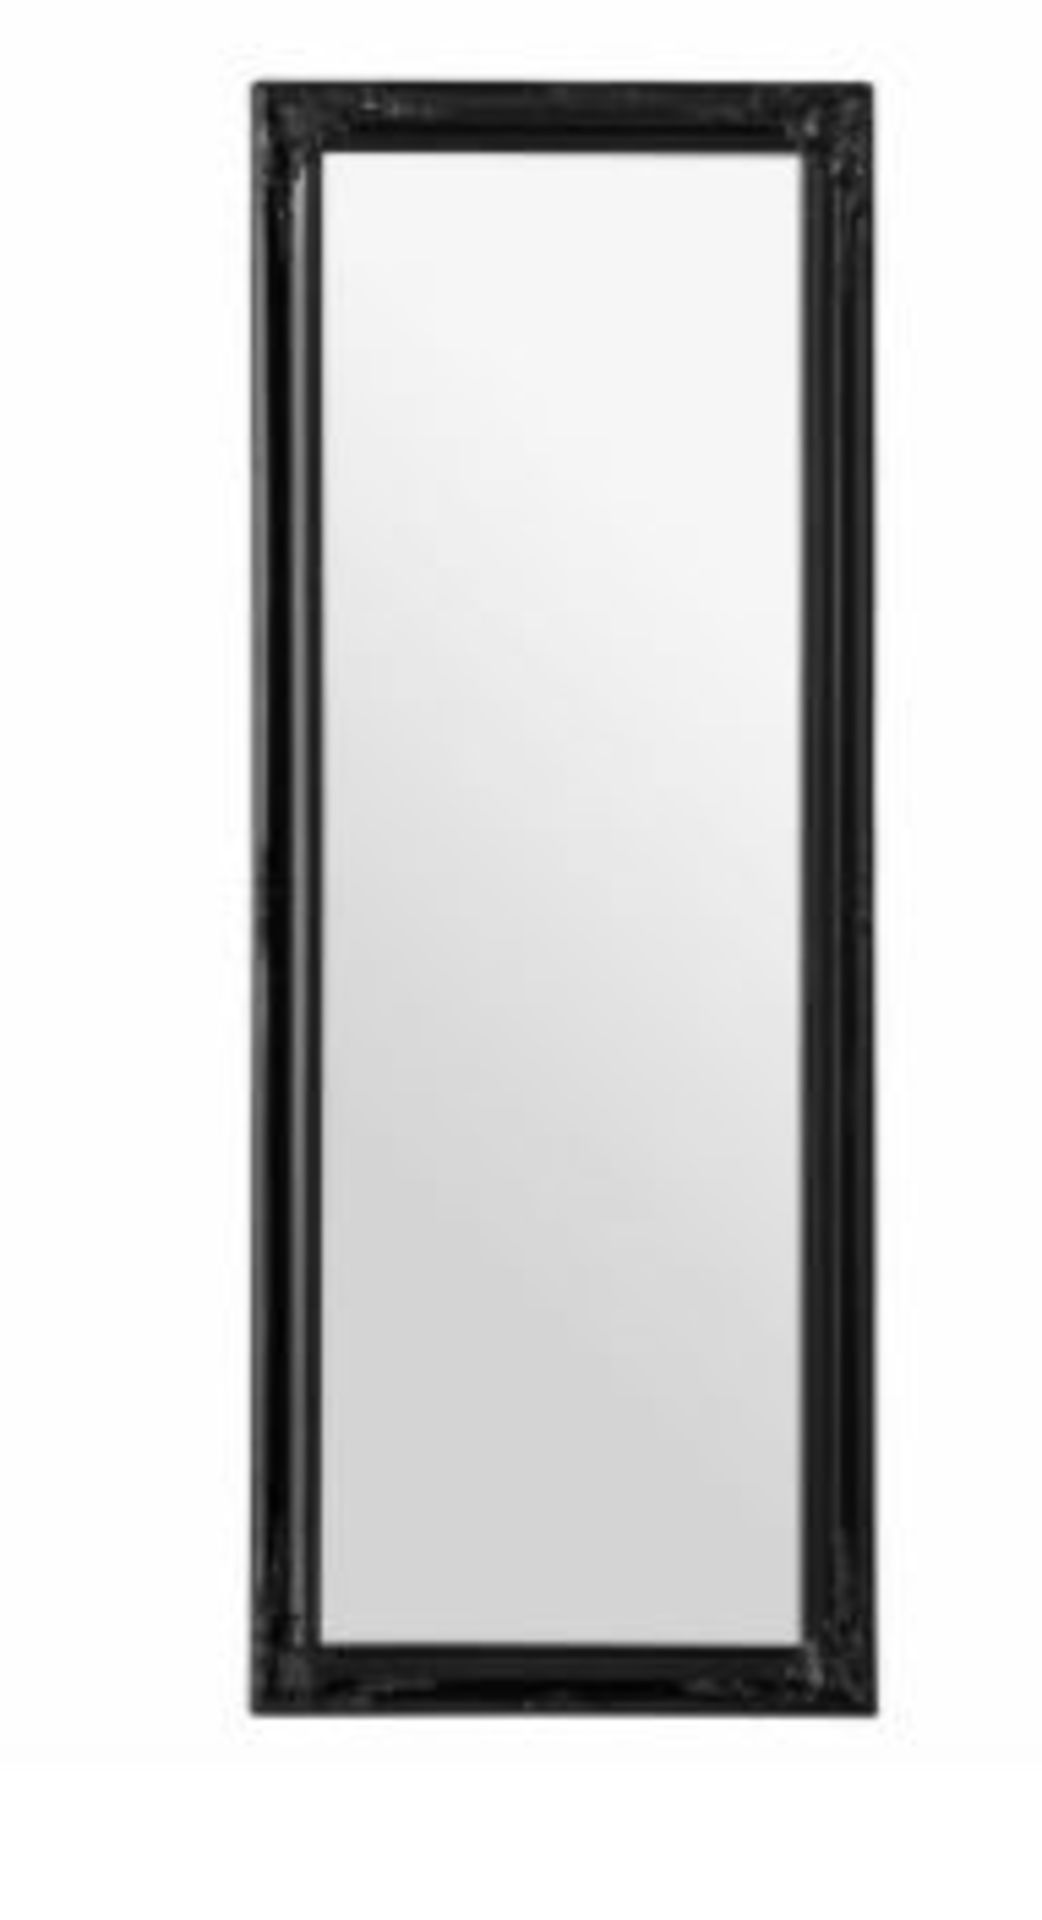 CHANCELLOR VINTAGE ACCENT MIRROR IN BLACK / RRP £71.99 / GRADE C, TWO DAMAGED CORNERS